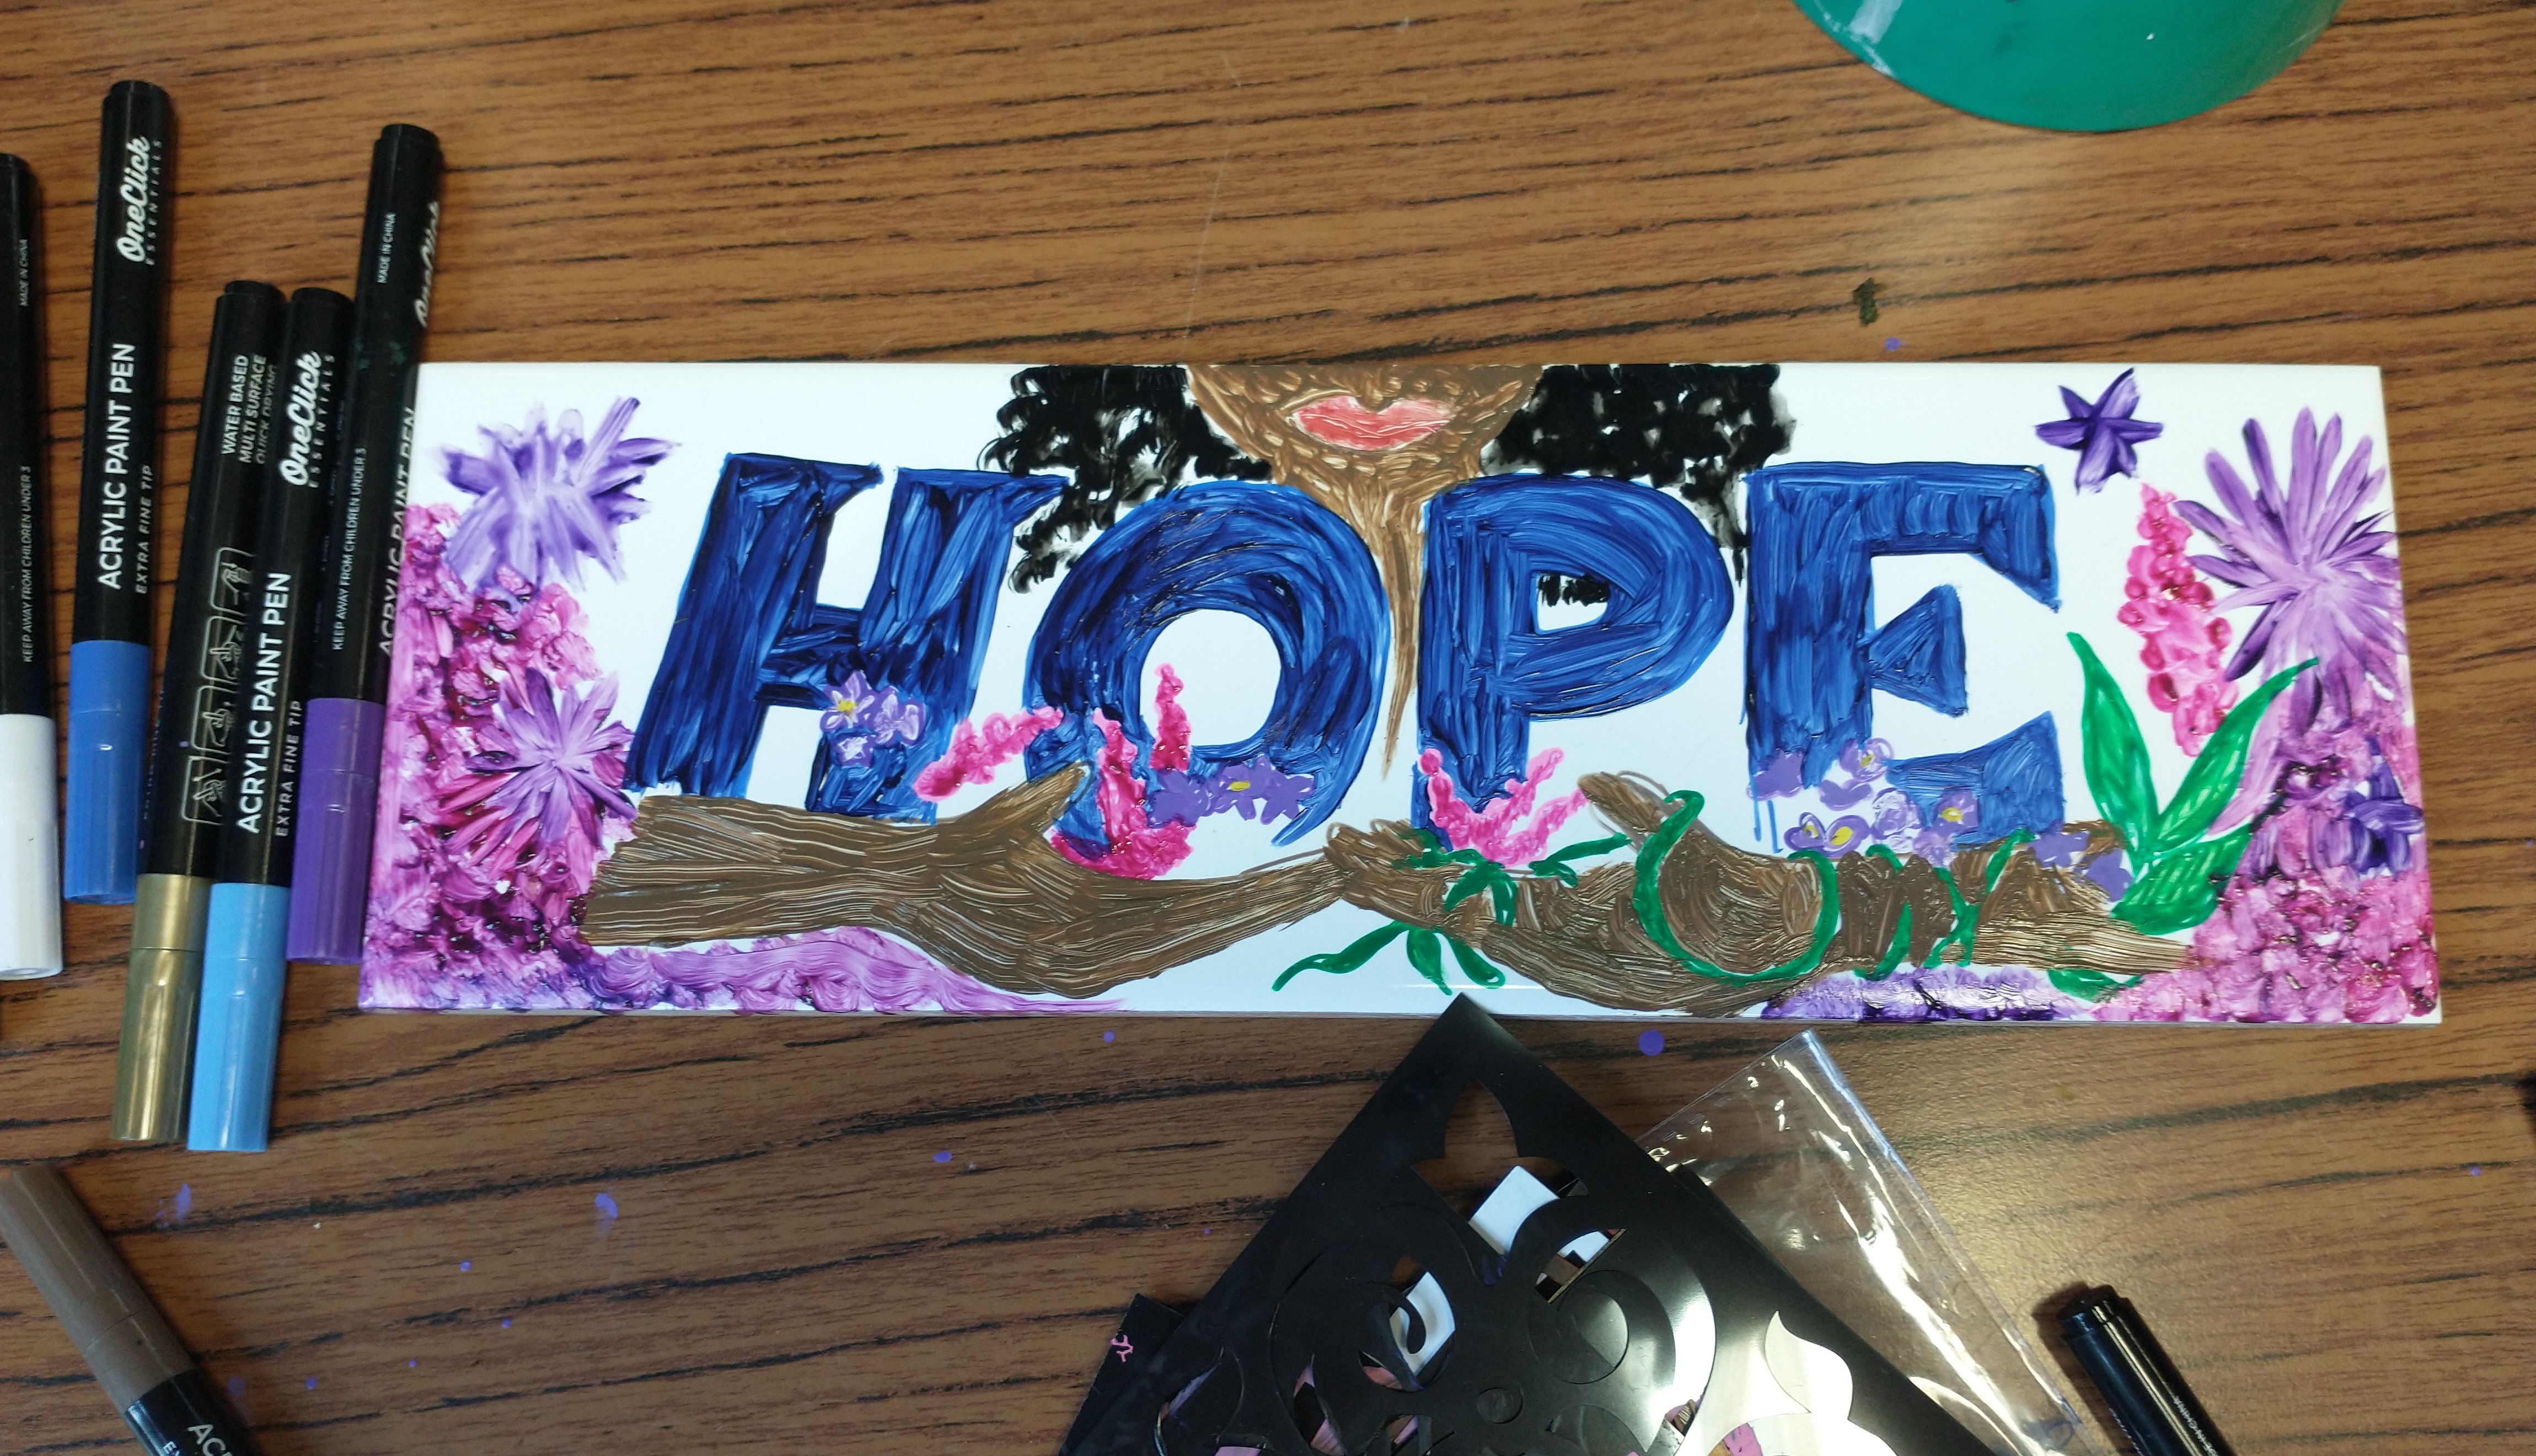 A artwork banner with the word 'Hope' written on it, created by young people from Pie's Open Arms sessions